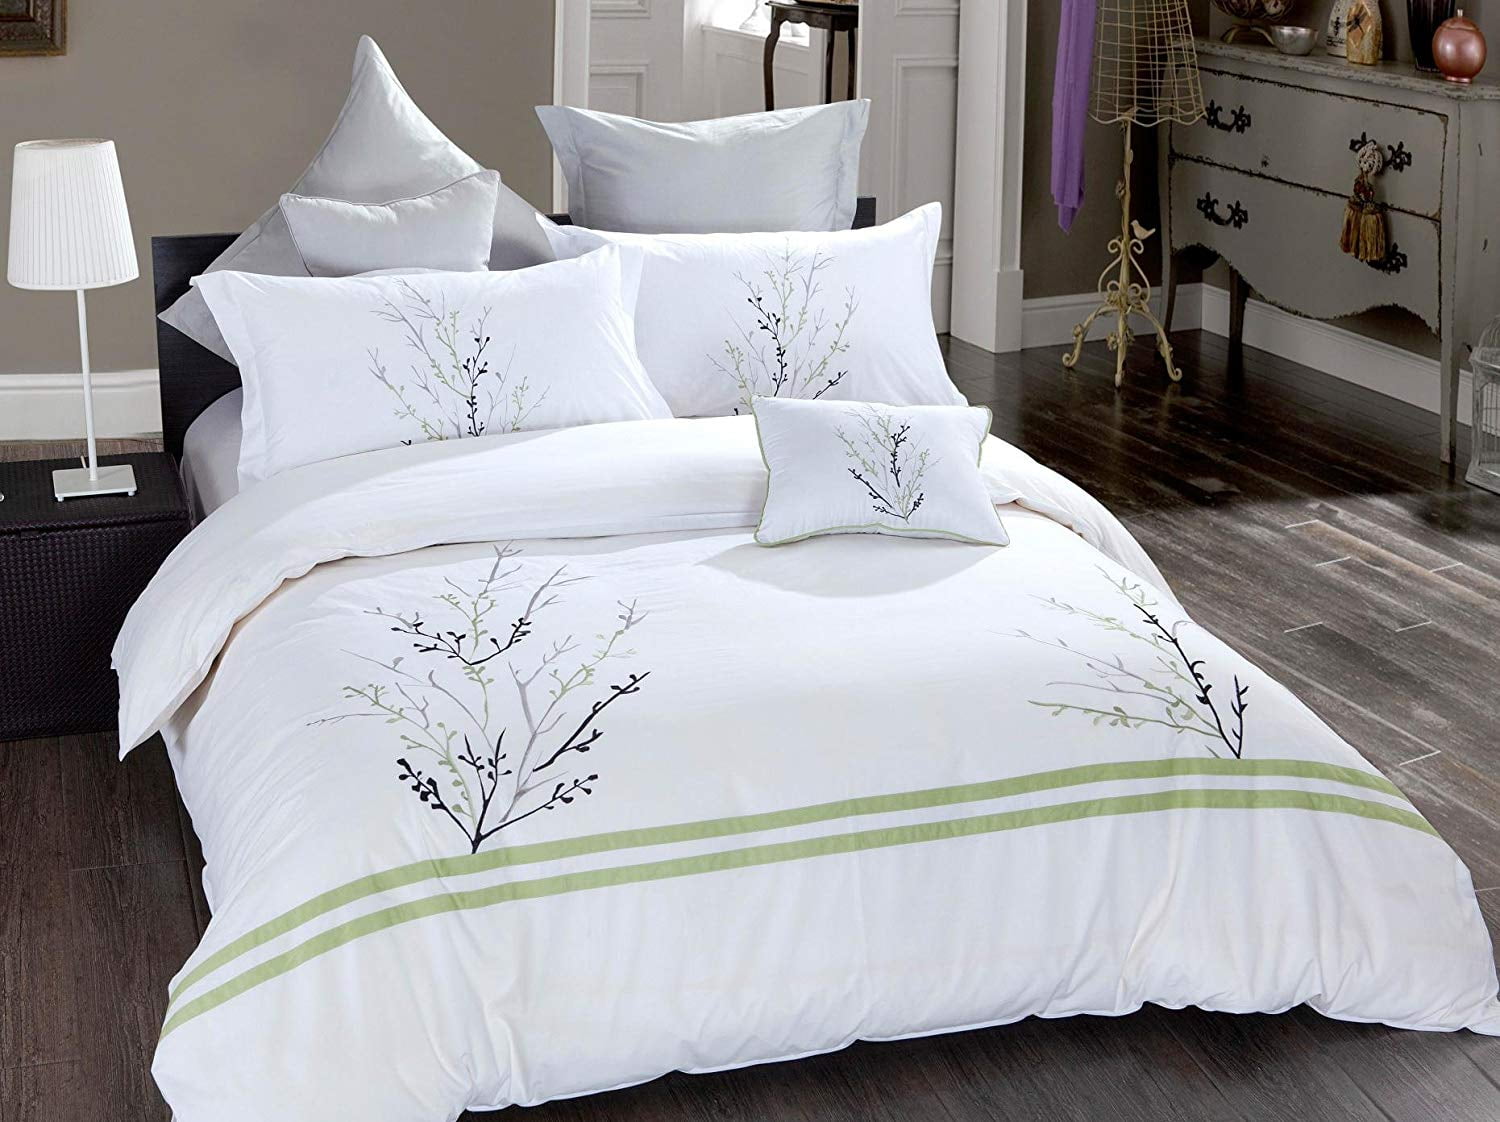 Legacy Decor 7 Pcs Poly Cotton Floral Embroidered Duvet Cover Bedding